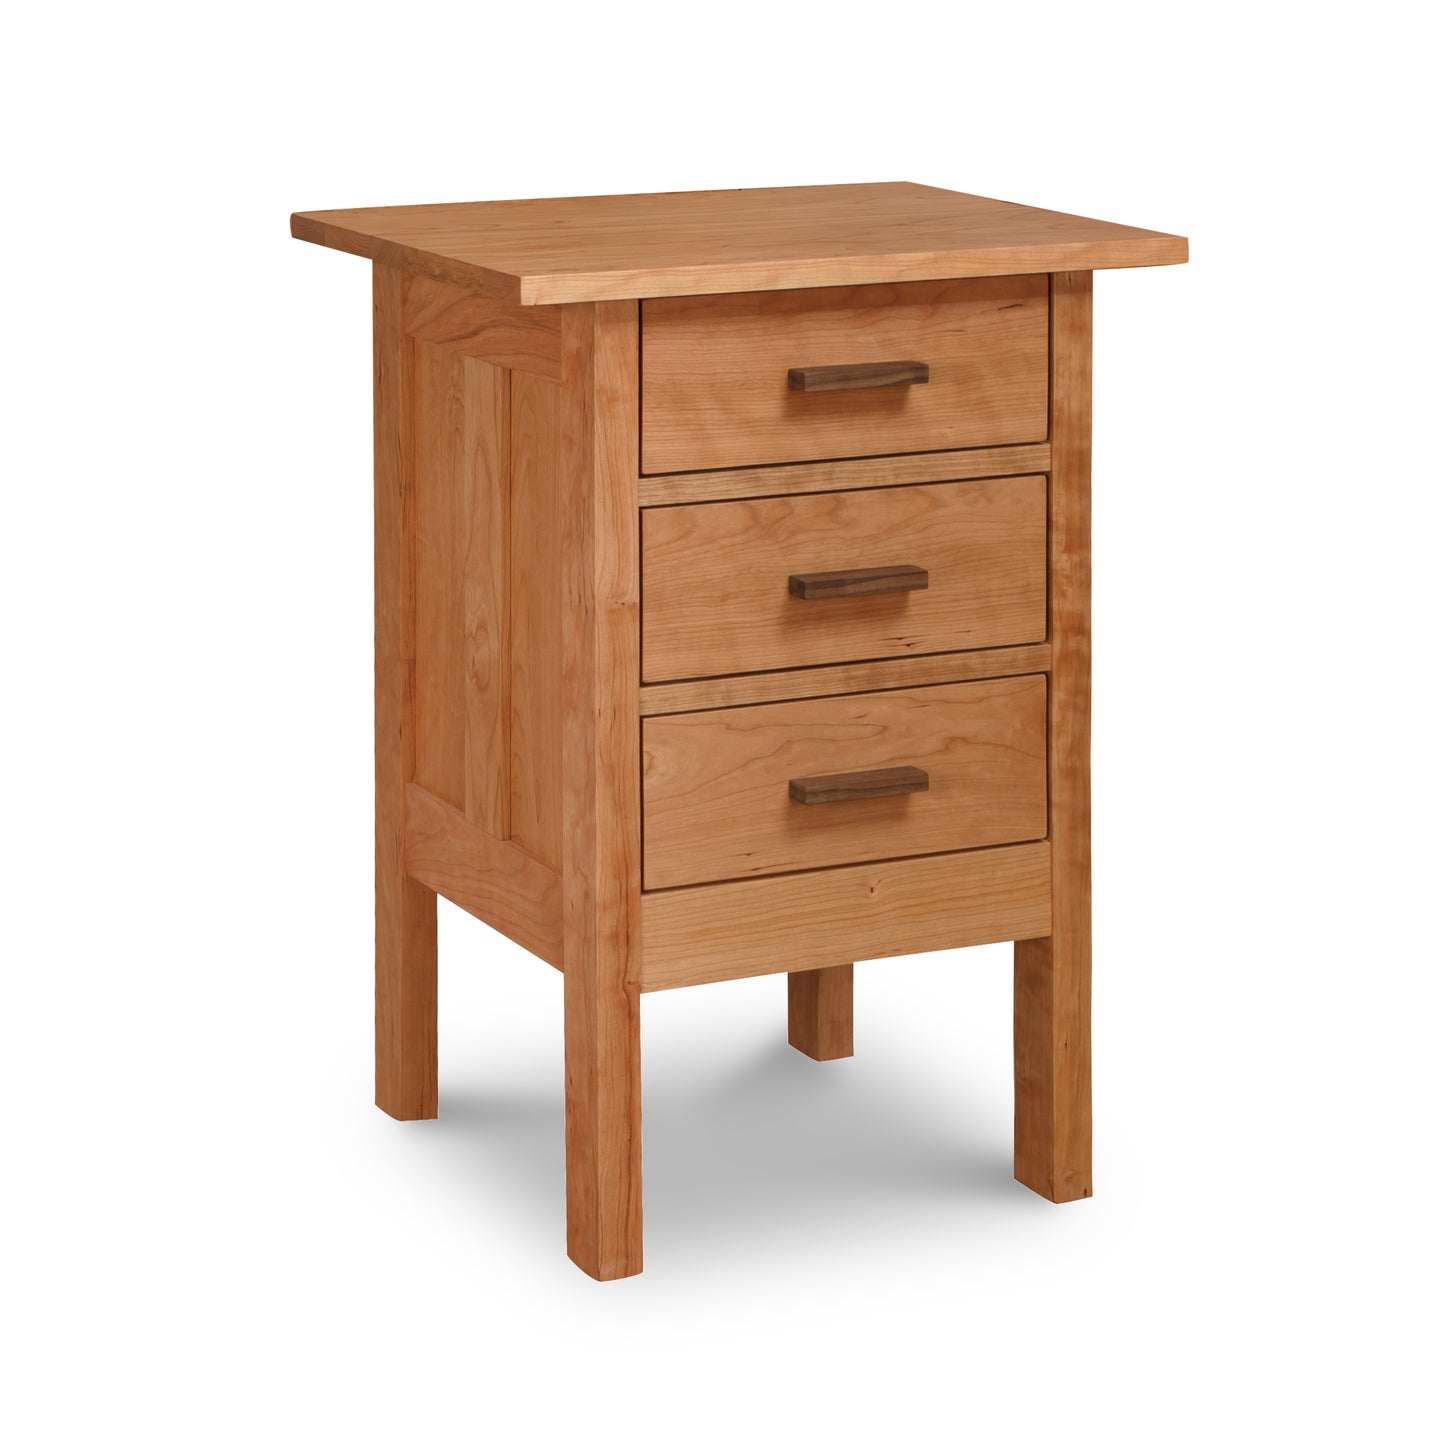 A Vermont Furniture Designs Modern Craftsman 3-Drawer Nightstand, made of solid wood with three drawers, isolated against a white background.